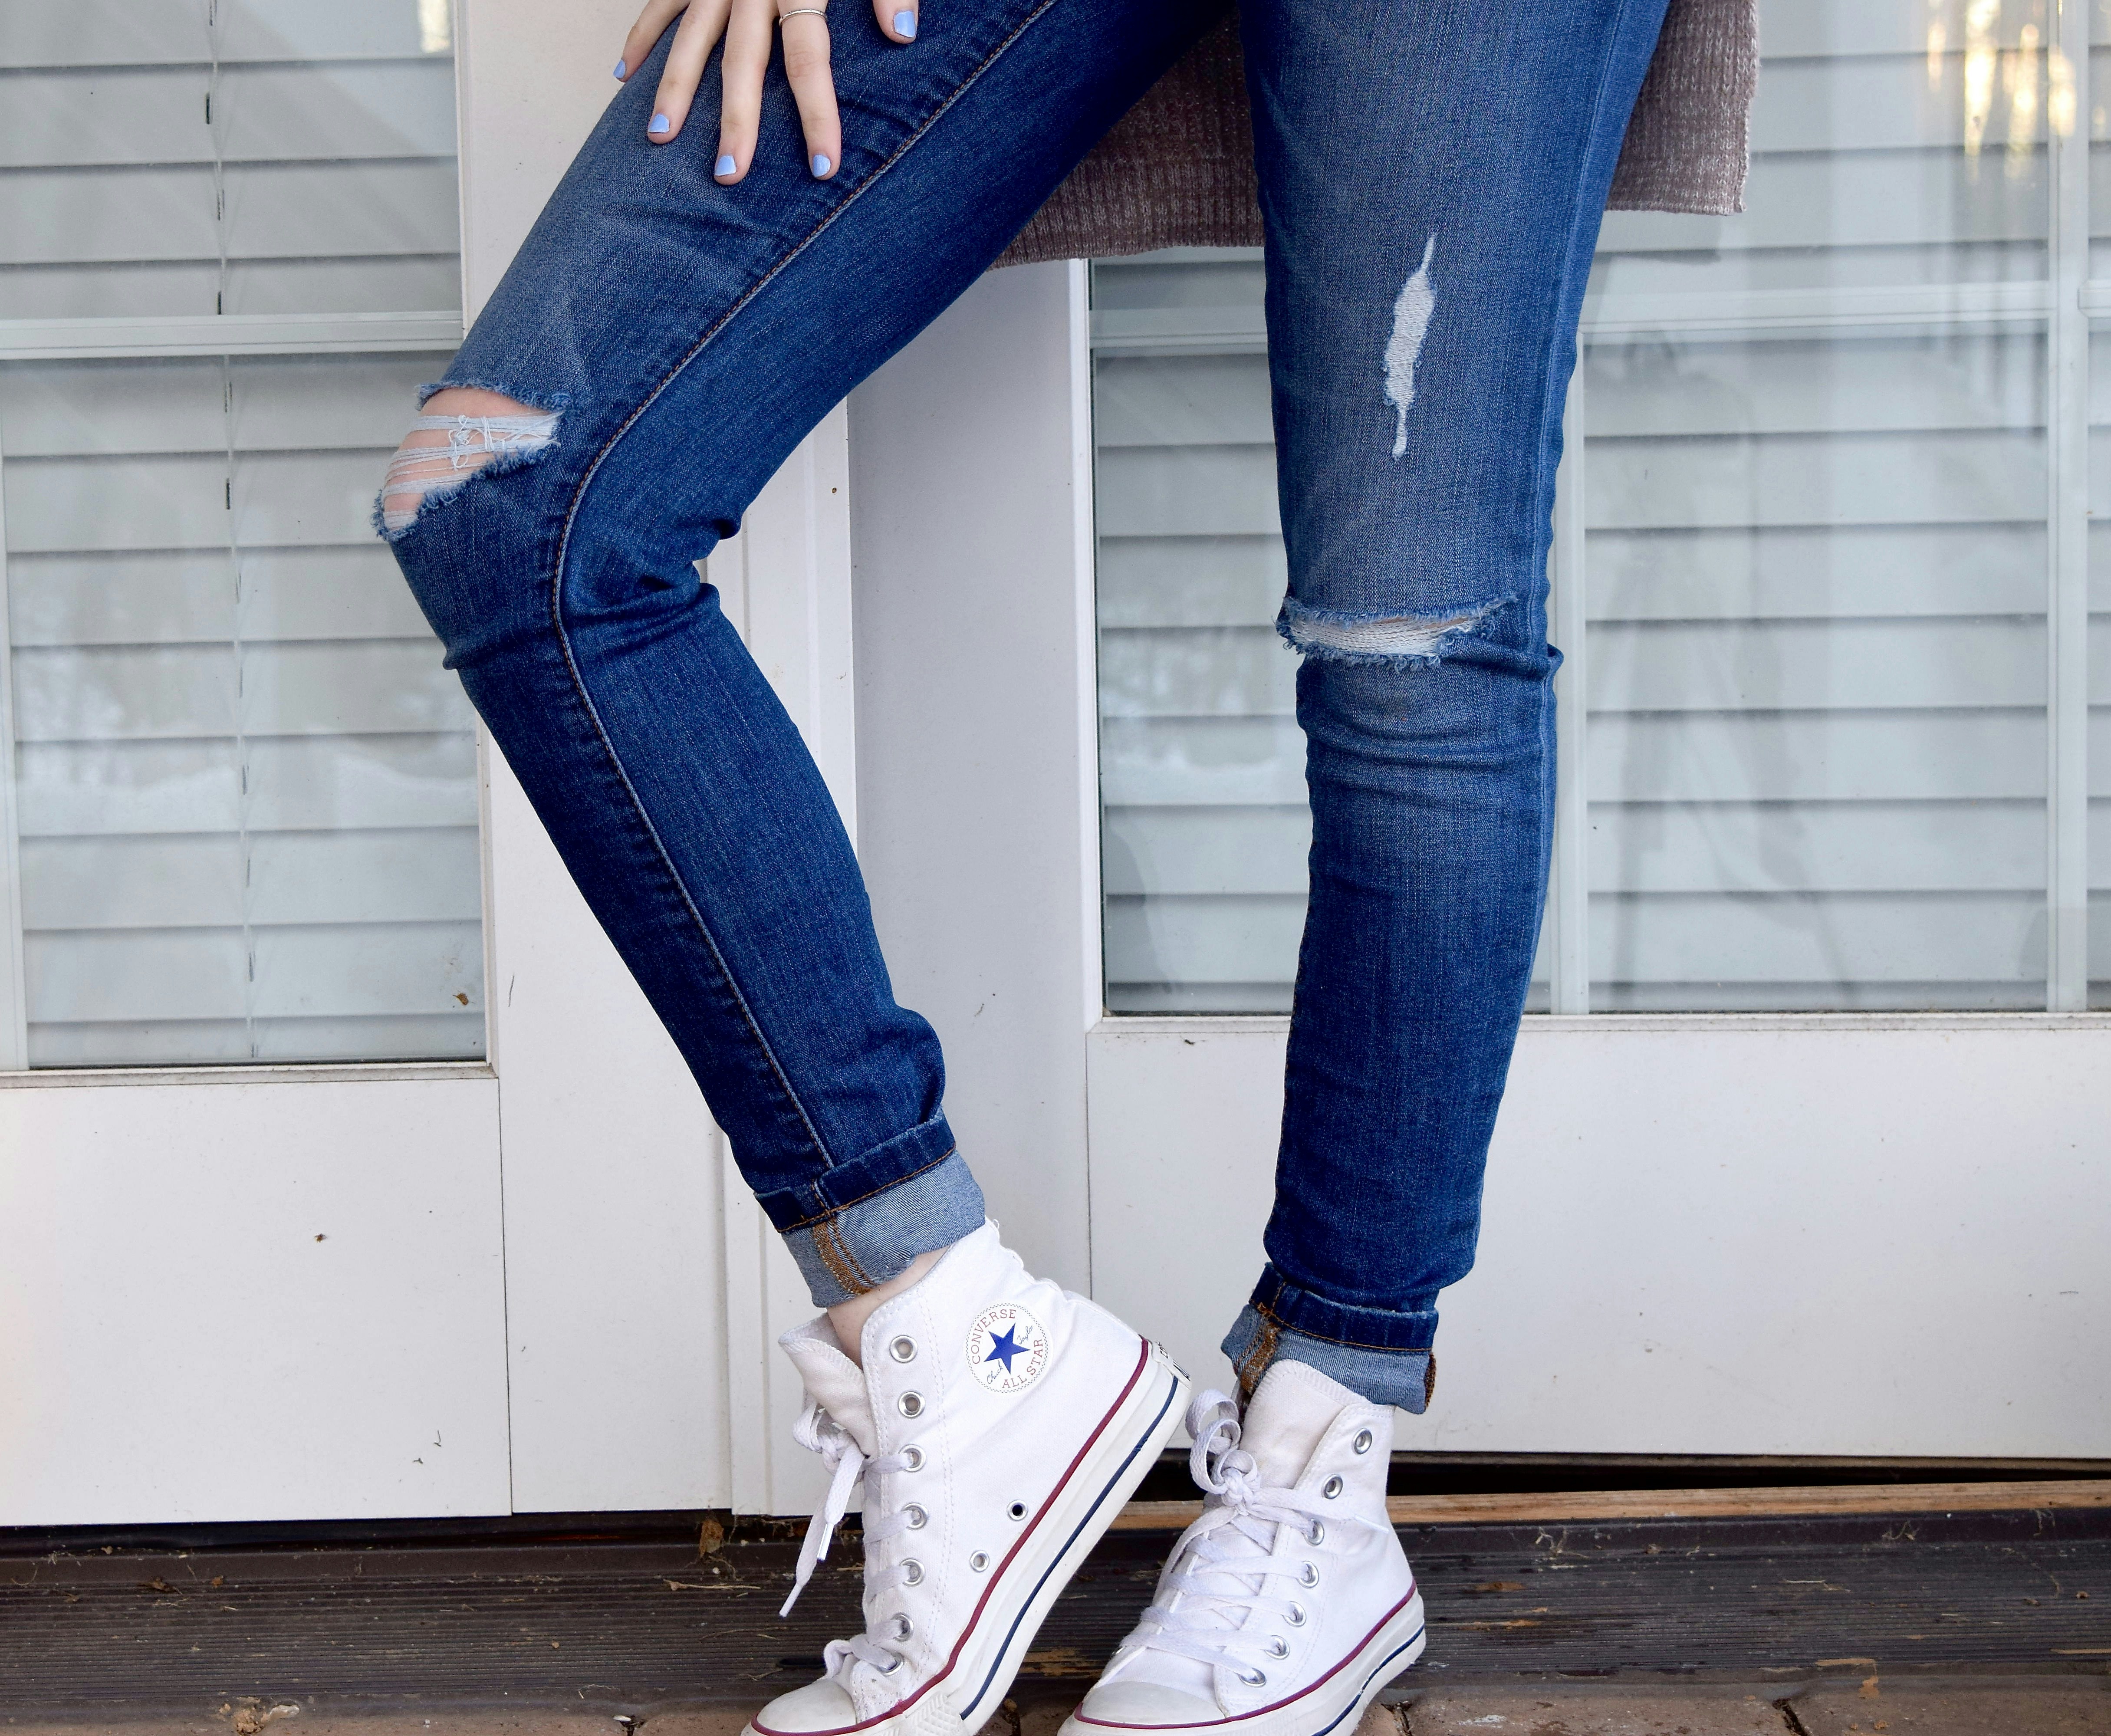 white converse with jeans